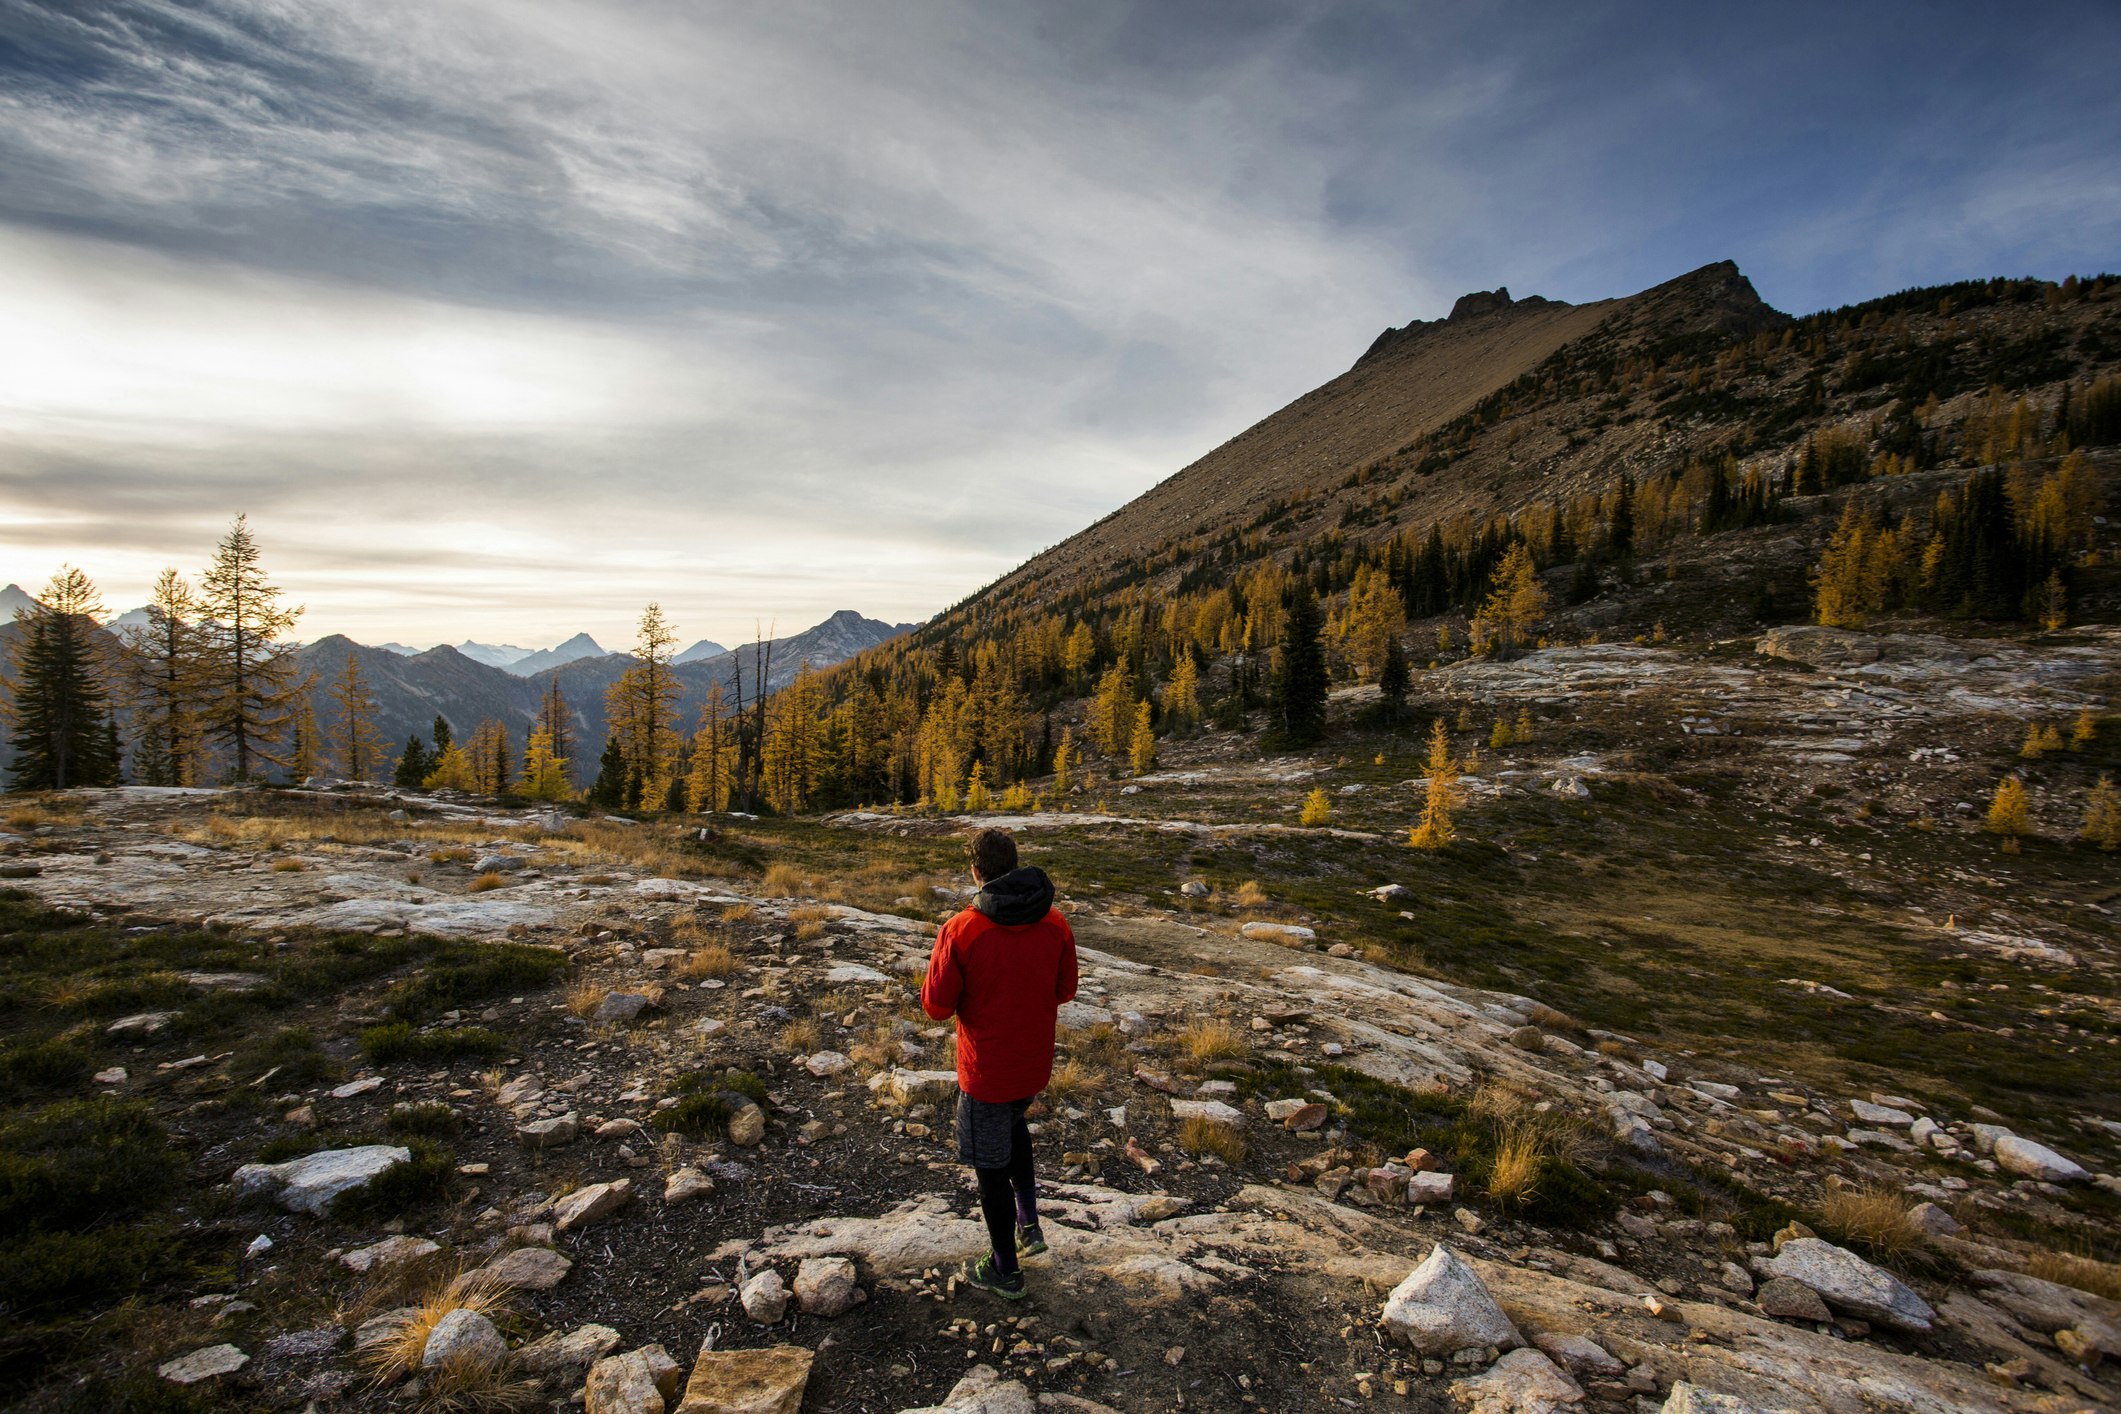 A young man walks in an alpine region alongside the colorful larch trees and steep mountains of the Cascades in the Pasayten Wildernes